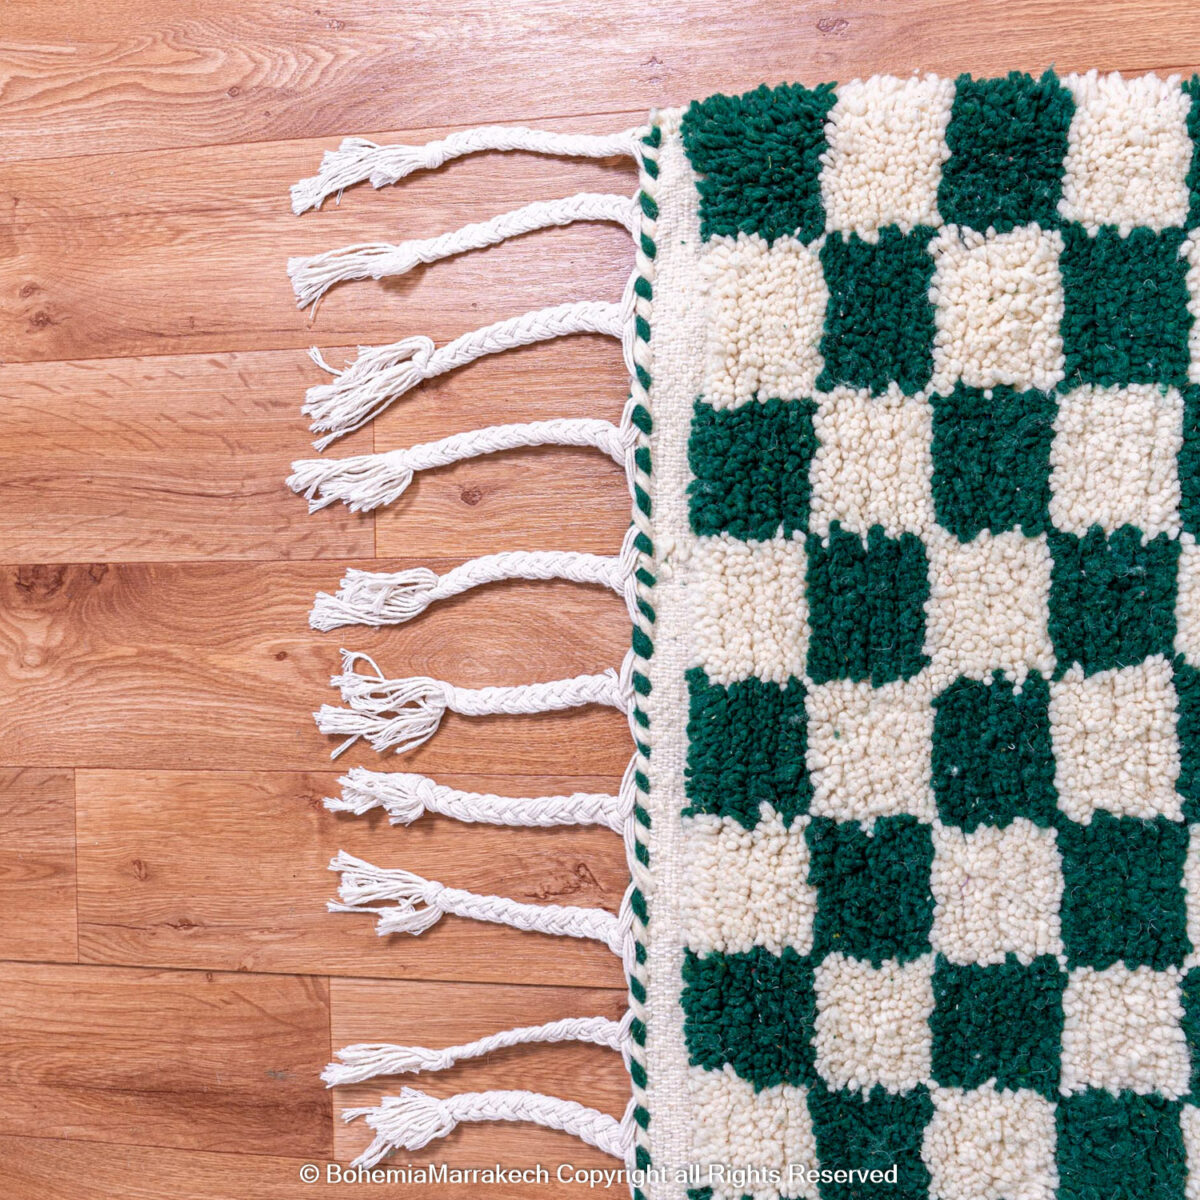 checkered rug, checkerboard rug, black and white checkered rug, checkered area rug, checkered jute rug, green checkered rug, pink checkered rug, brown checkered rug, beige checkered rug, checkered shag rug, neutral checkered rug, checkered outdoor rug, tan checkered rug, checkered rug 8x10, washable checkered rug, cream checkered rug, blue plaid rug, blue checkered rug, orange checkered rug, jute checkered rug, checkered bath mat, jute checkerboard rug, plaid rug 8x10, ruggable checkered rug, diamond checkered rug, chris loves julia checkered rug, black checkered rug, checkered washable rug, checkerboard jute rug, checkered carpet, west elm checkered rug, white checkered rug, large checkered rug, brown and white checkered rug, plaid rug 9x12, green plaid rug, rugs usa checkered rug, tan and white checkered rug, outdoor checkered rug, 8x10 checkered rug, irregular checkerboard rug, green and white checkered rug, checkered wool rug, checker board rug, burnt orange checkered rug, 9x12 checkered rug, wayfair checkered rug, checkerboard area rug, pink and white checkered rug, all modern checkered rug.